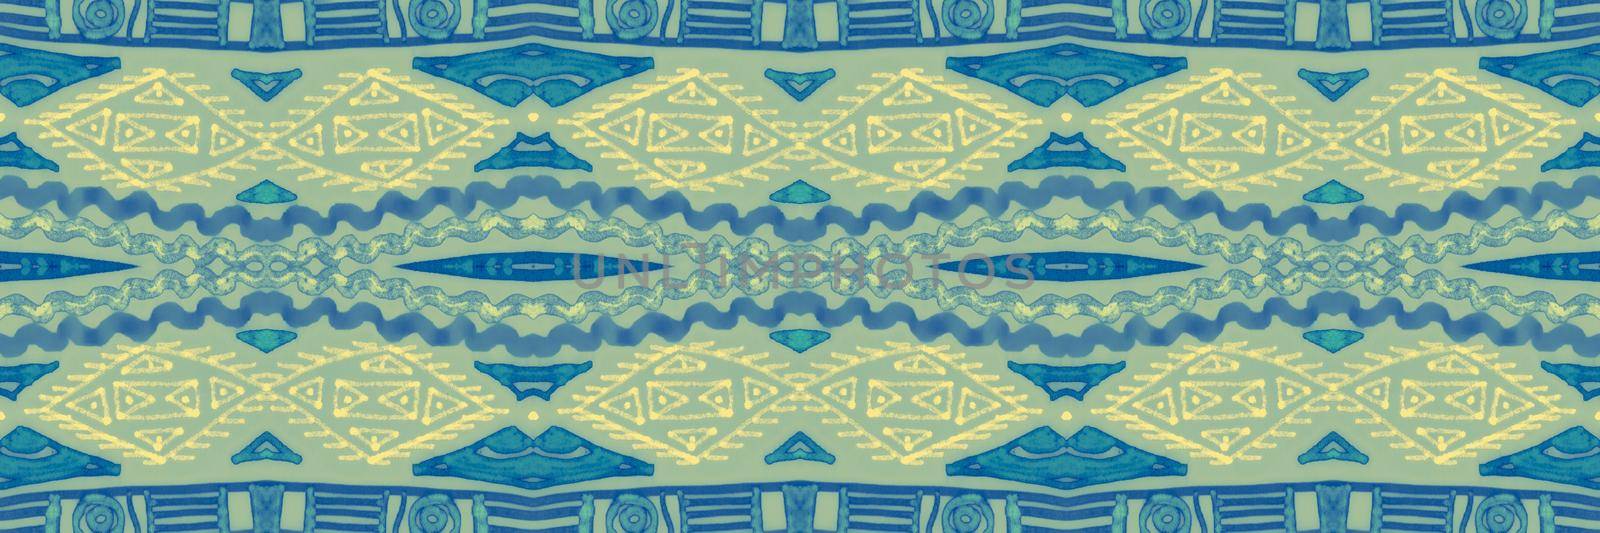 Geometric ethnic pattern. Traditional maya texture. Hand drawn aztec illustration. Vintage tribal indian ornament. Seamless ethnic pattern. Mexico textile design. Grunge native background.